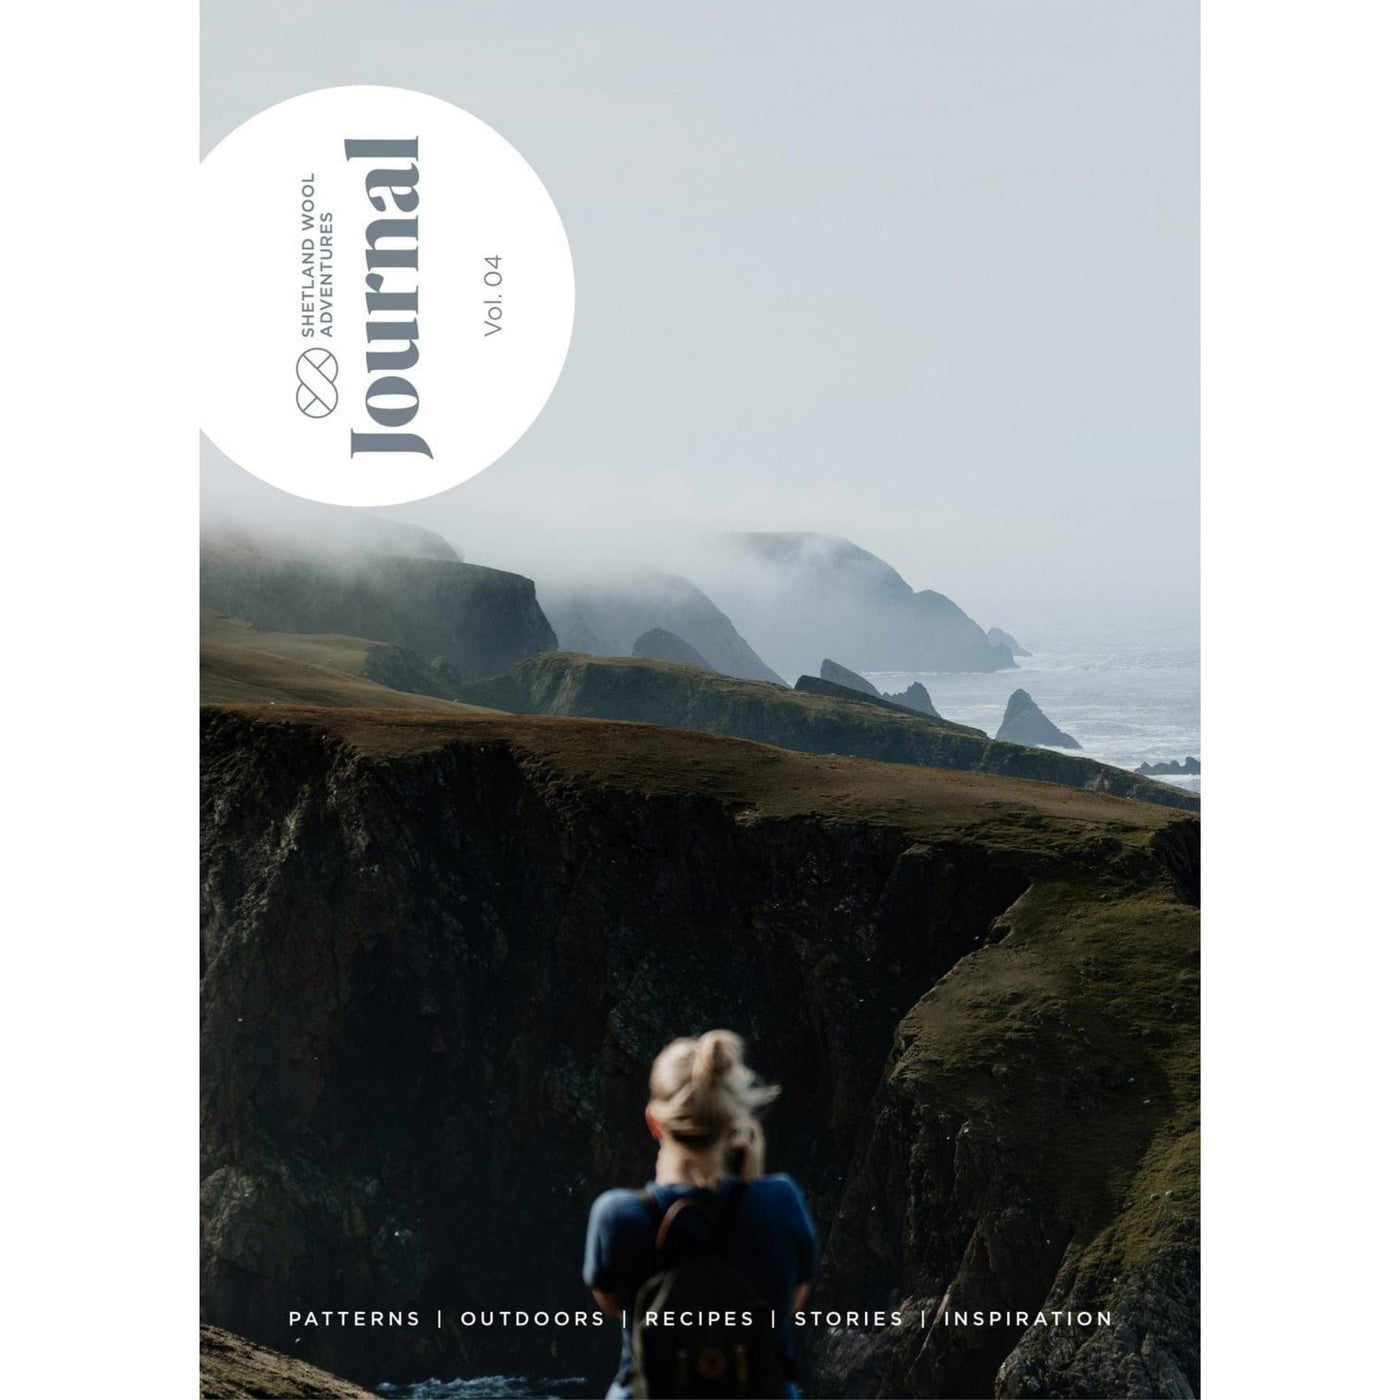 Cover of Shetland Wool Adventure Journal 4 showing back of woman facing mountainous landscape.